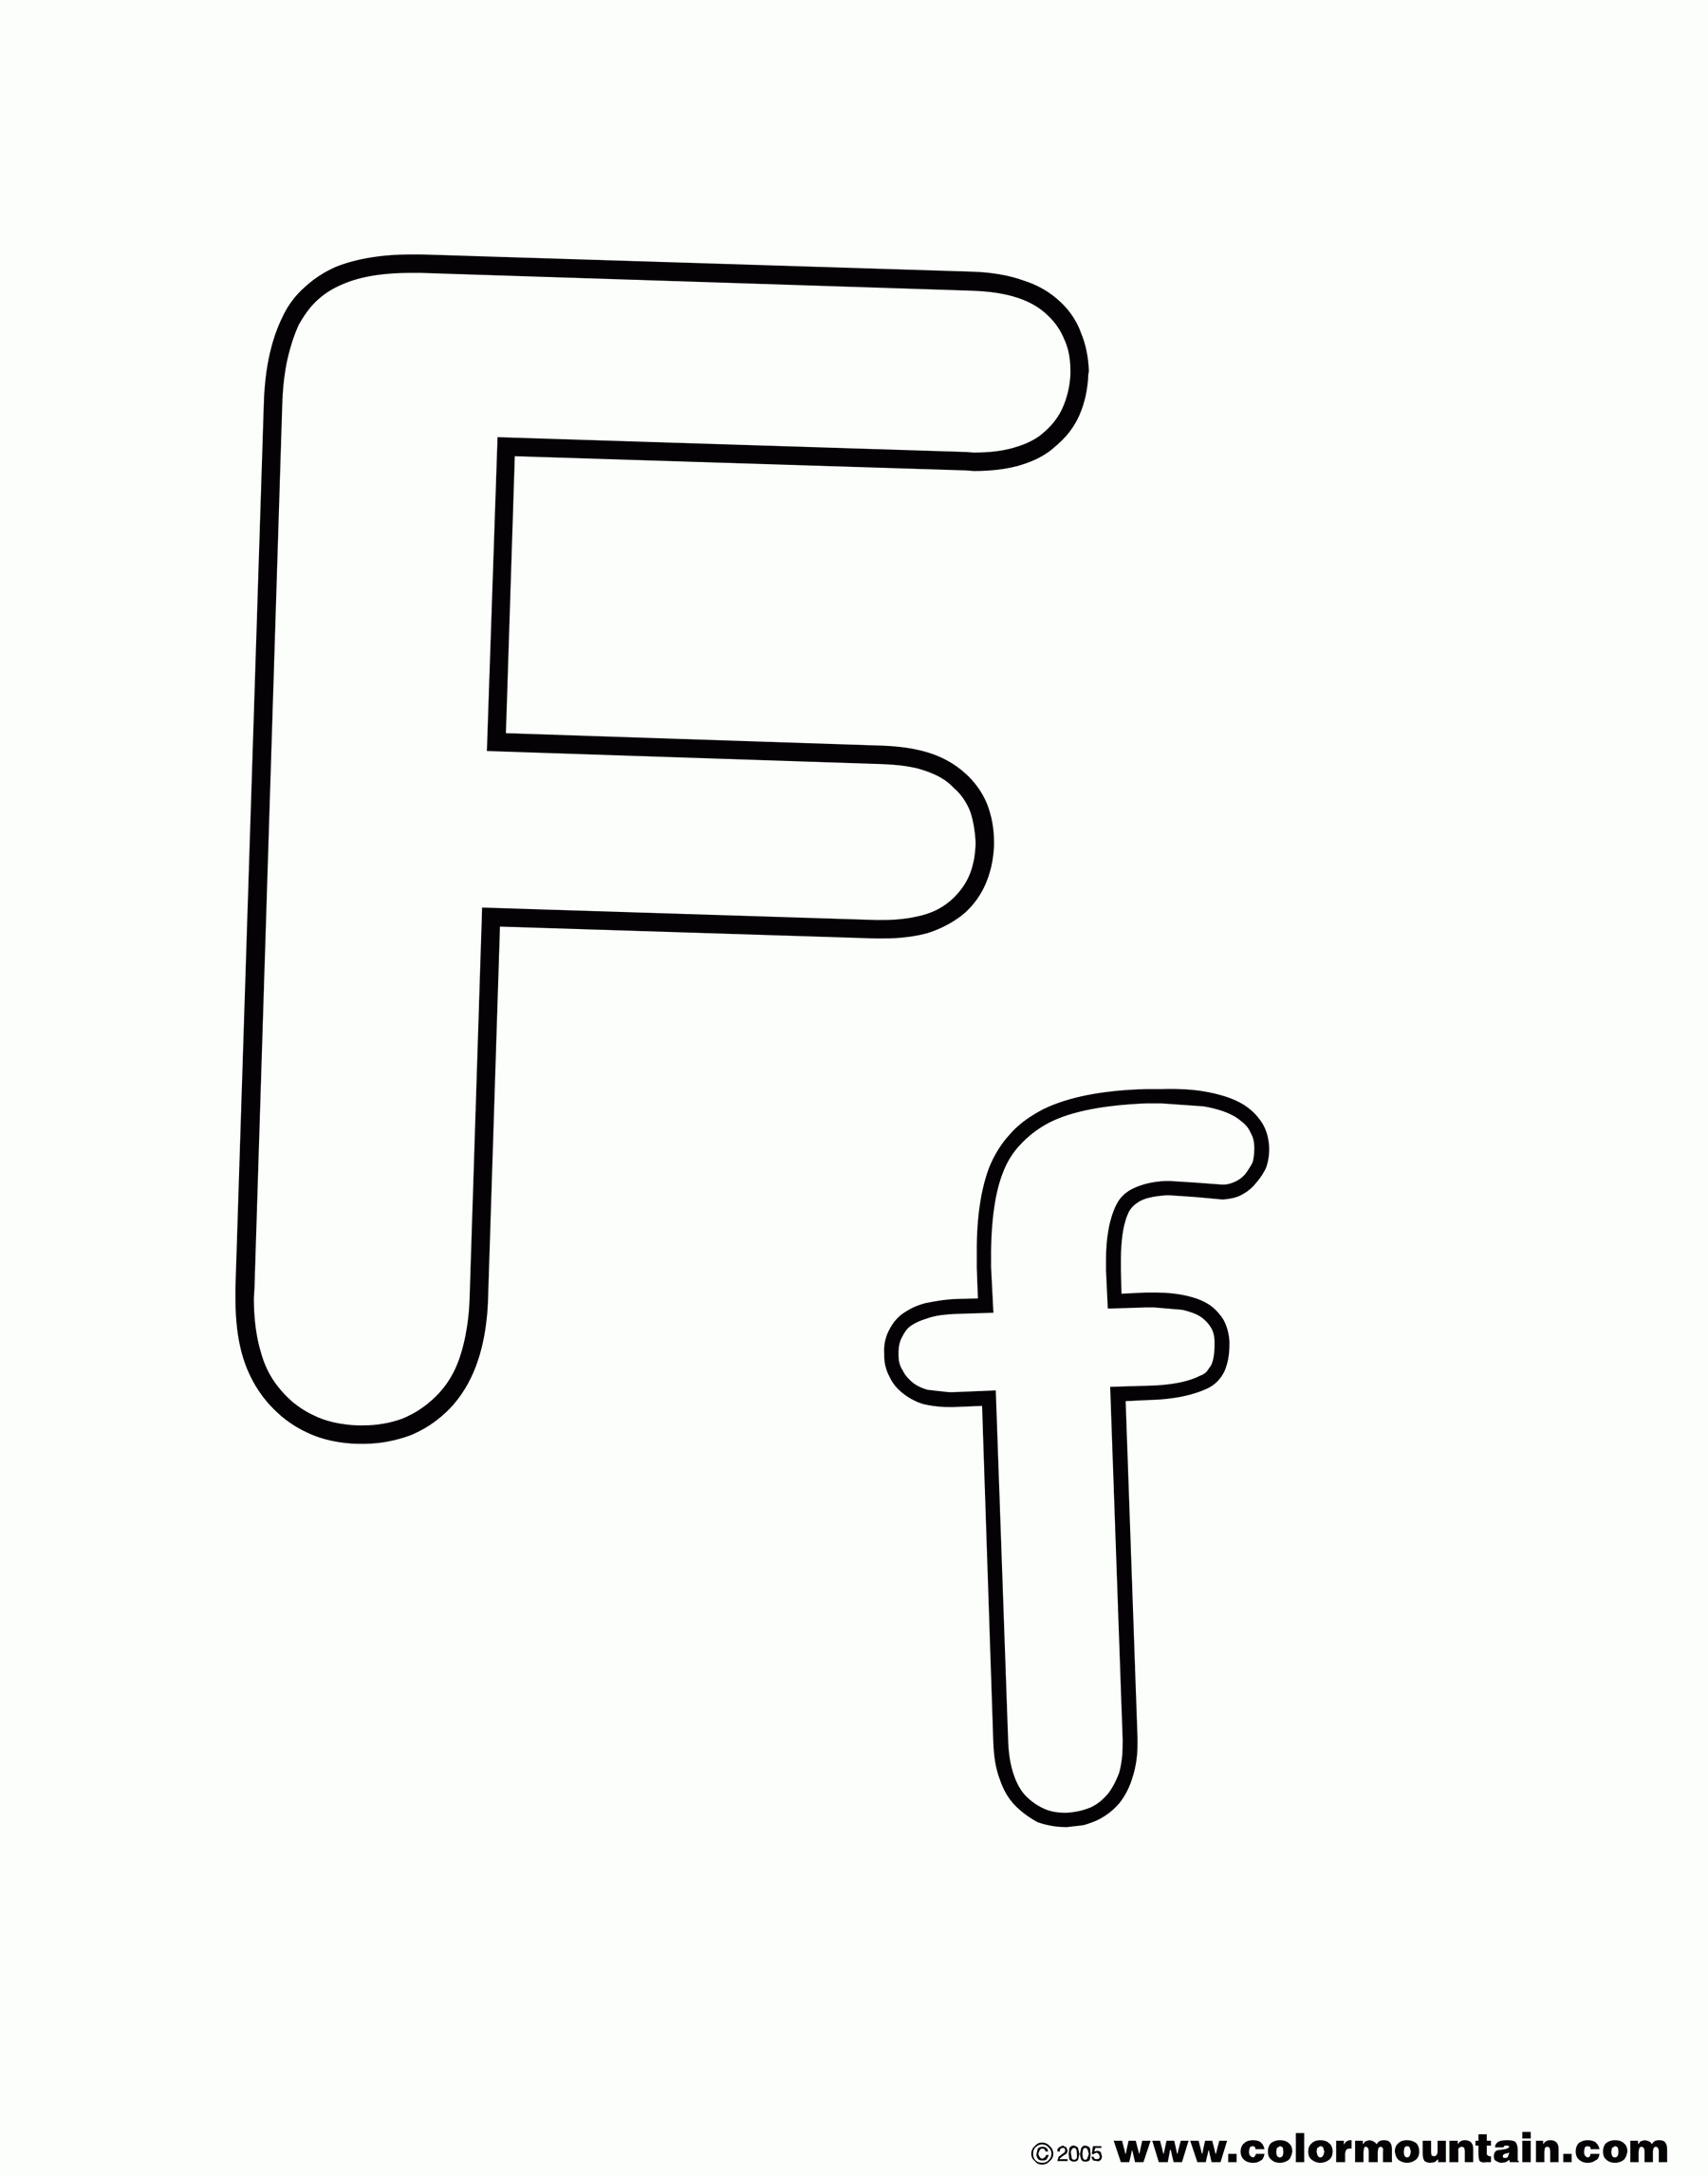 printable-letter-f-coloring-pages